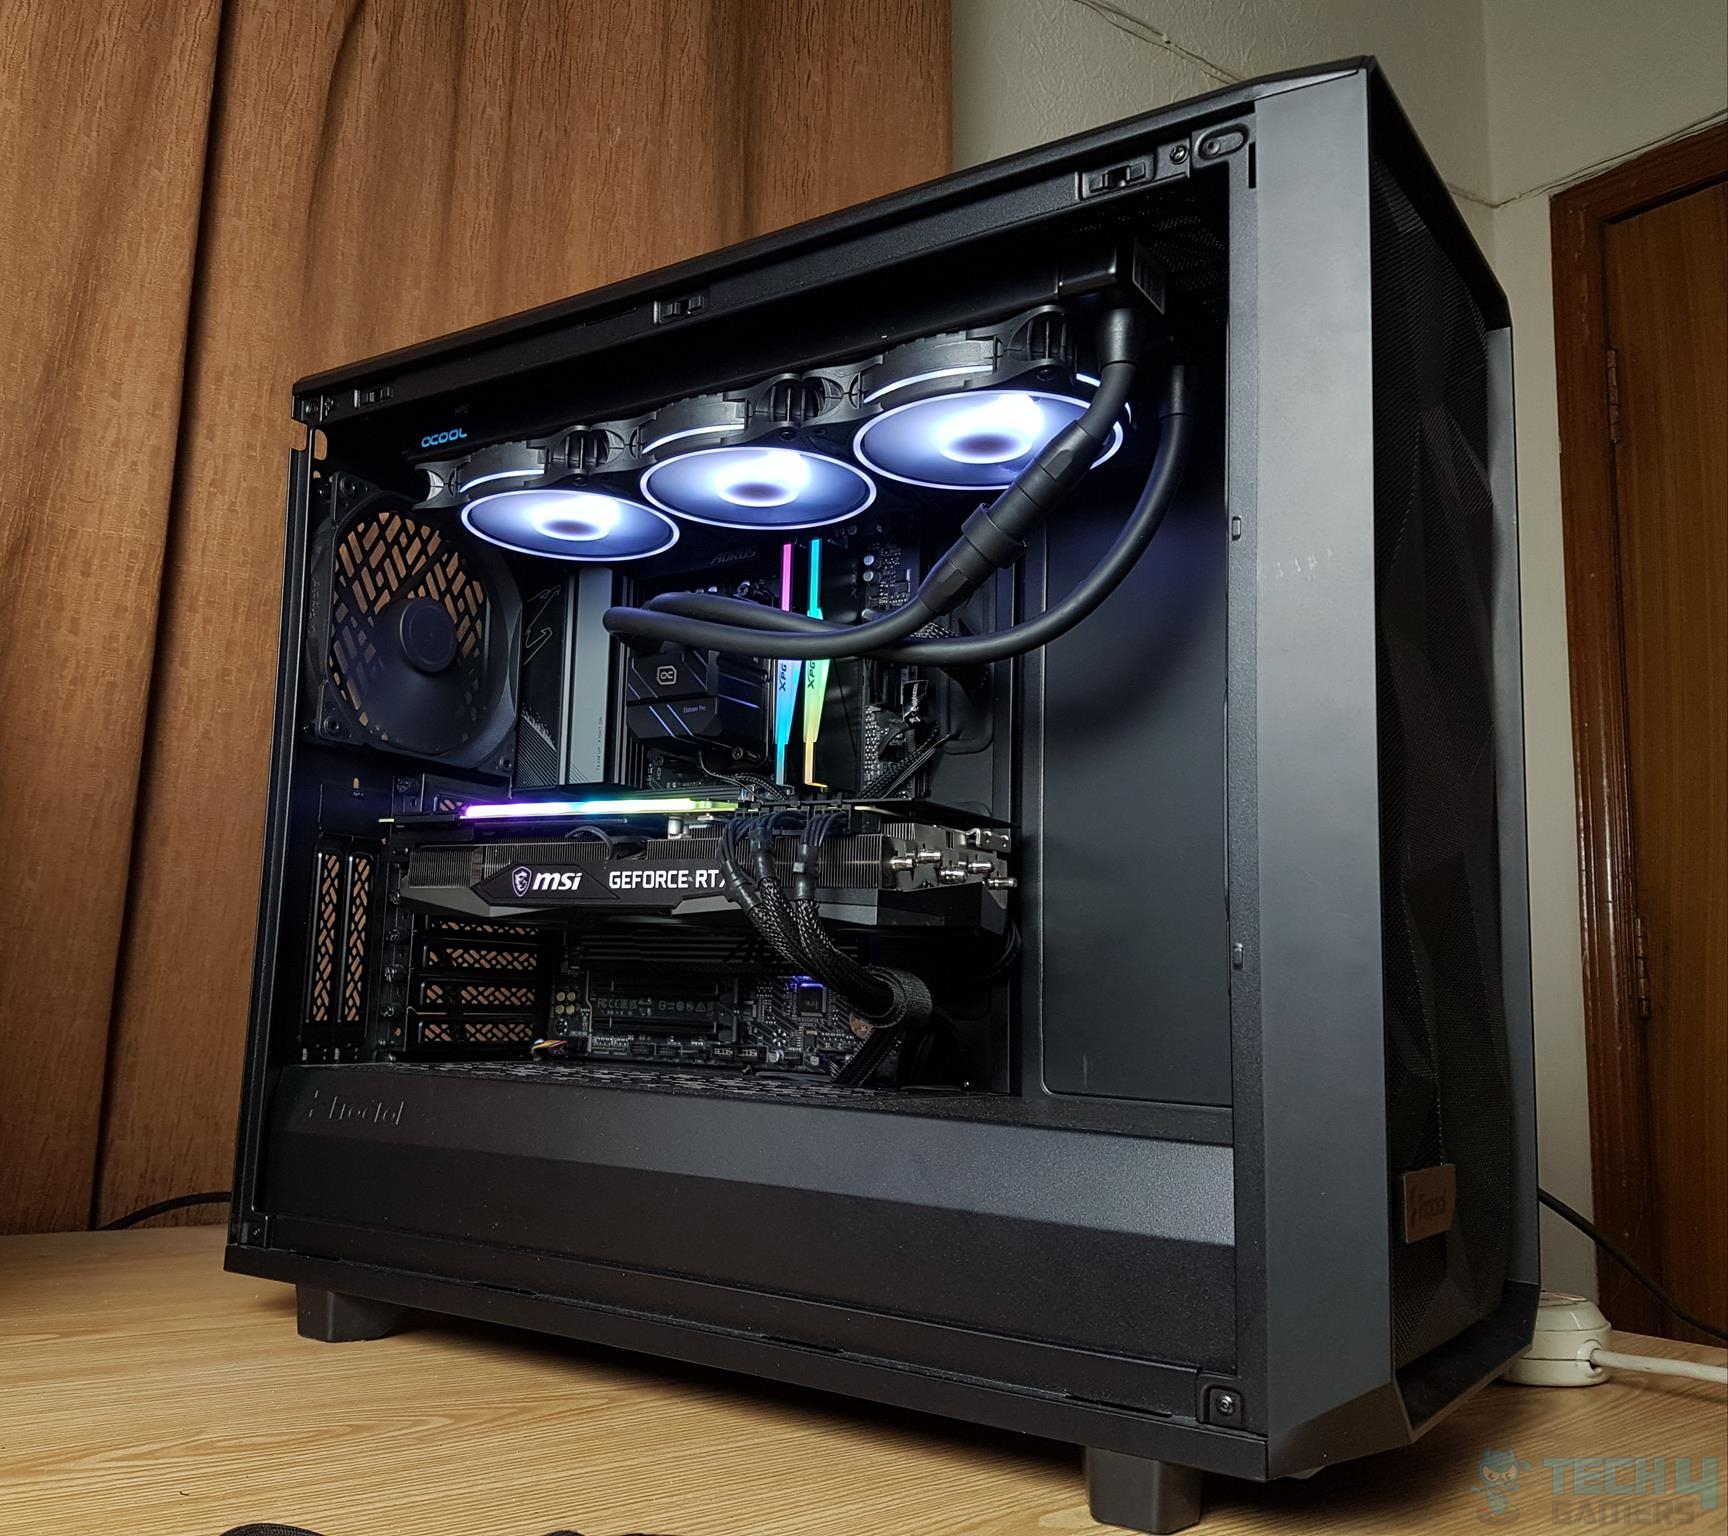 Fractal Design Meshify 2 — Another view of the test build without the side panel